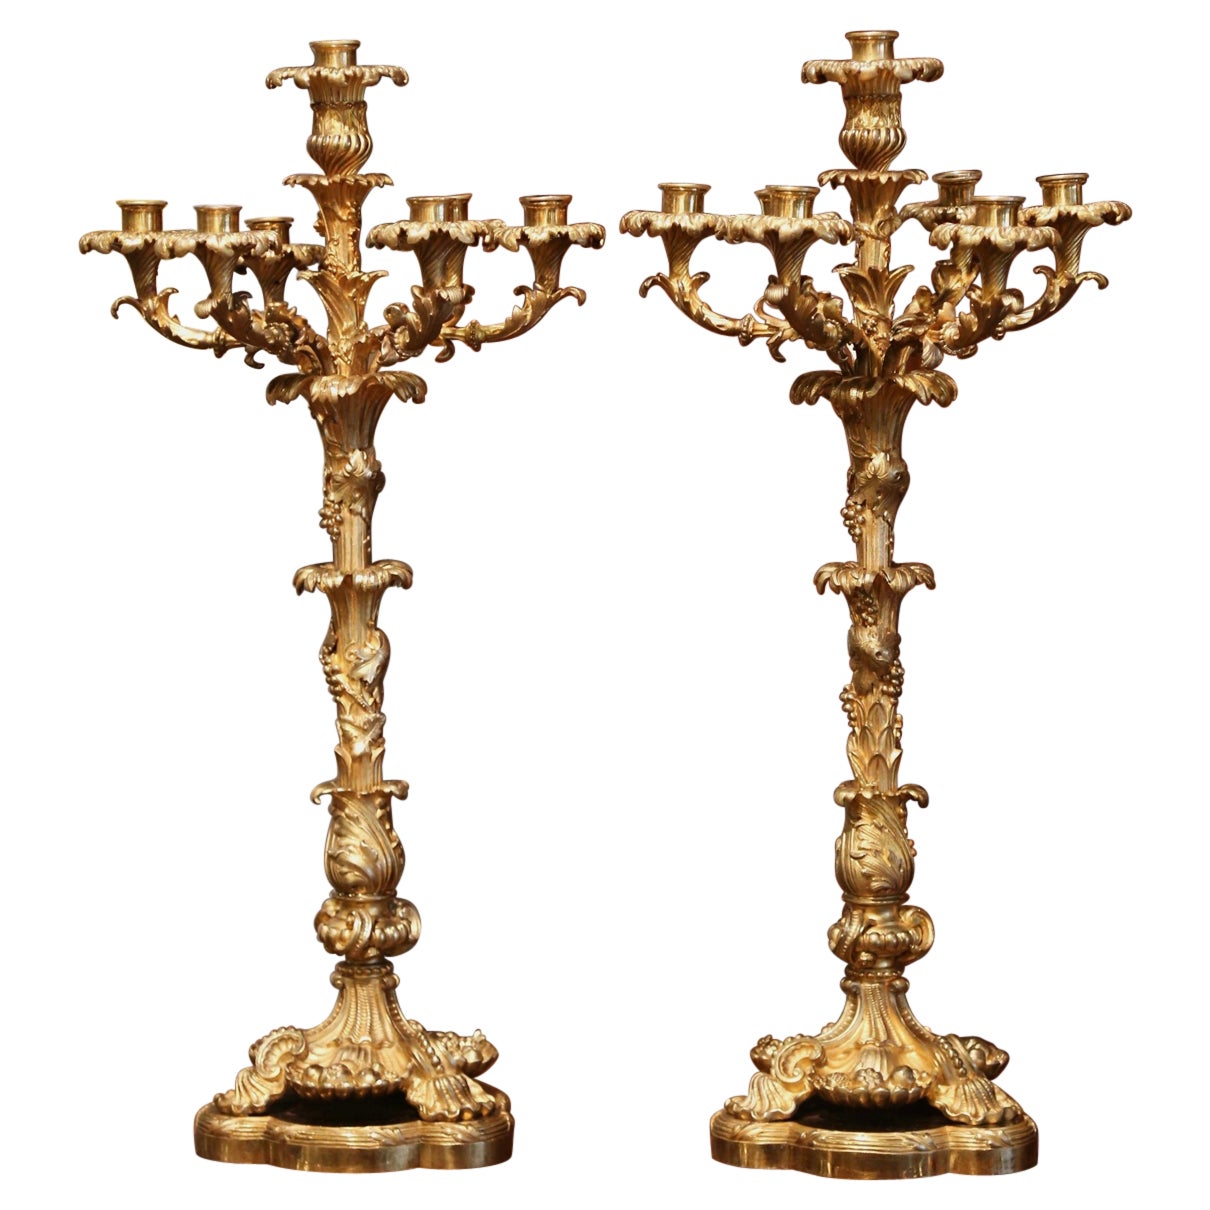 Pair of 19th Century French Louis XV Bronze Dore Seven-Light Candelabras